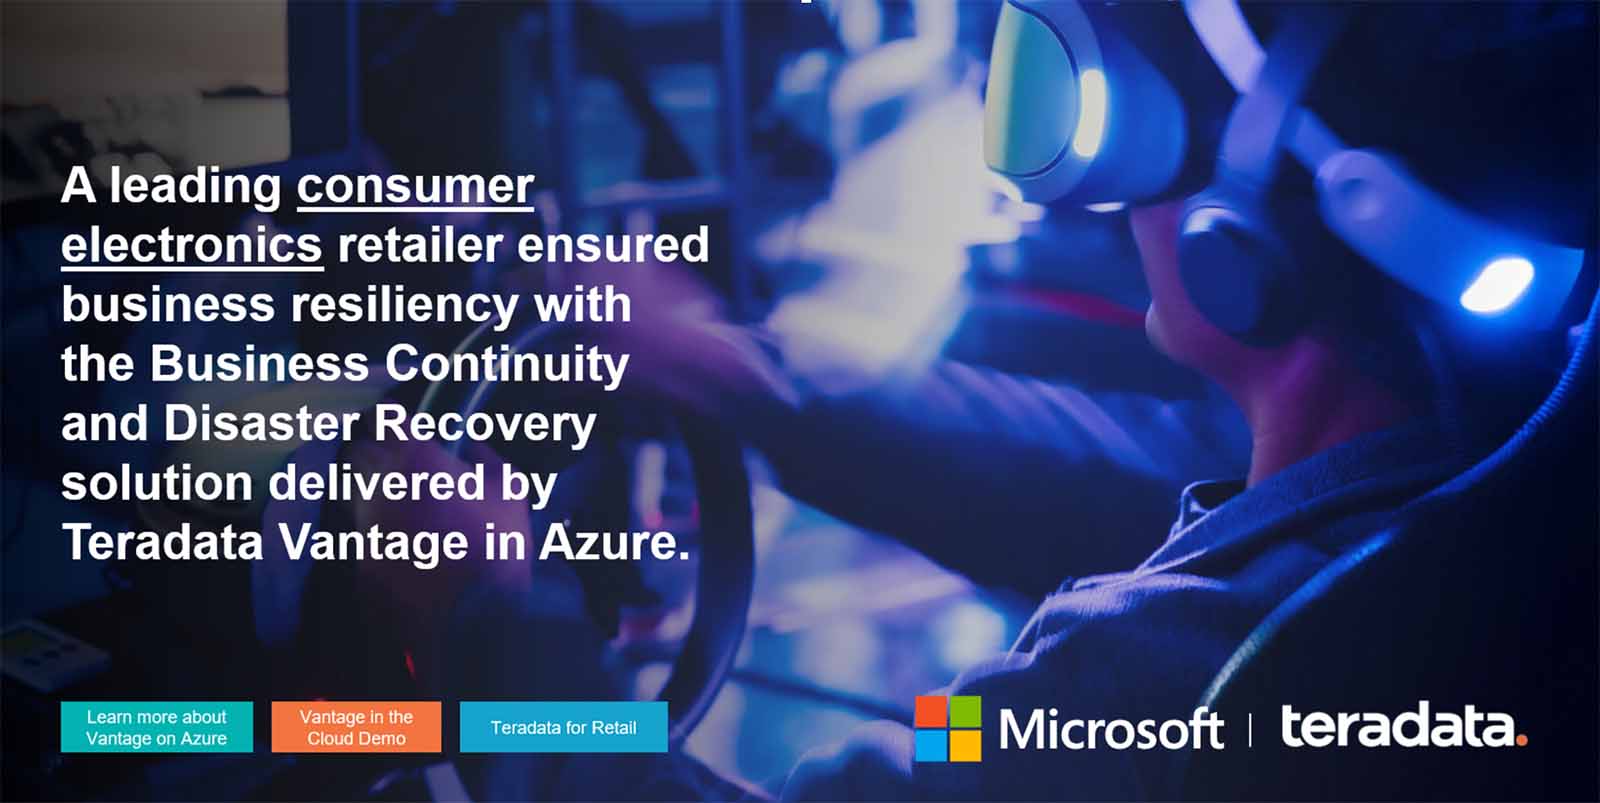 Vantage on Azure business continuity solution for retailers